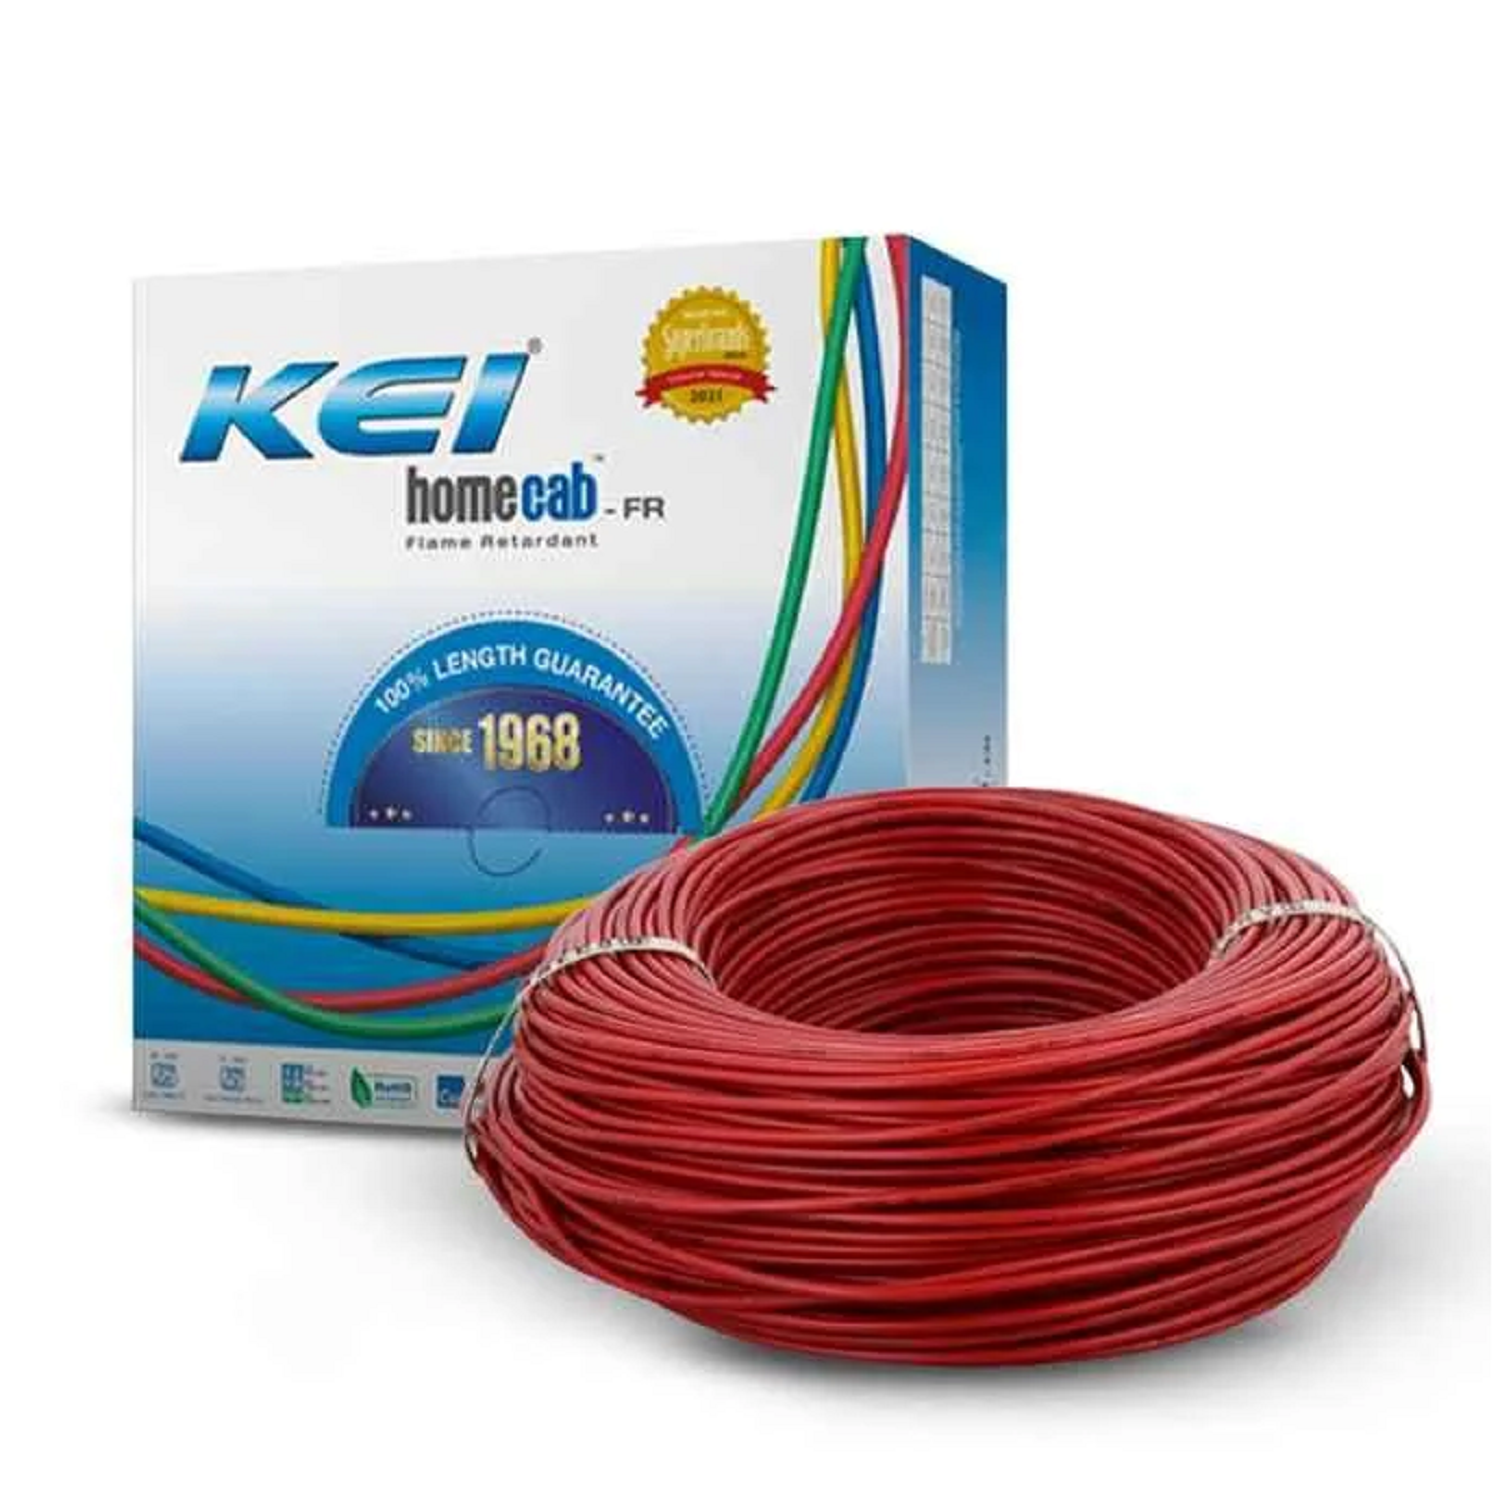 1.5 Sqmm KEI FR Single Core Copper Wire (90 Mtr) With PVC Insulated for House 38 Industrial Uses (Re